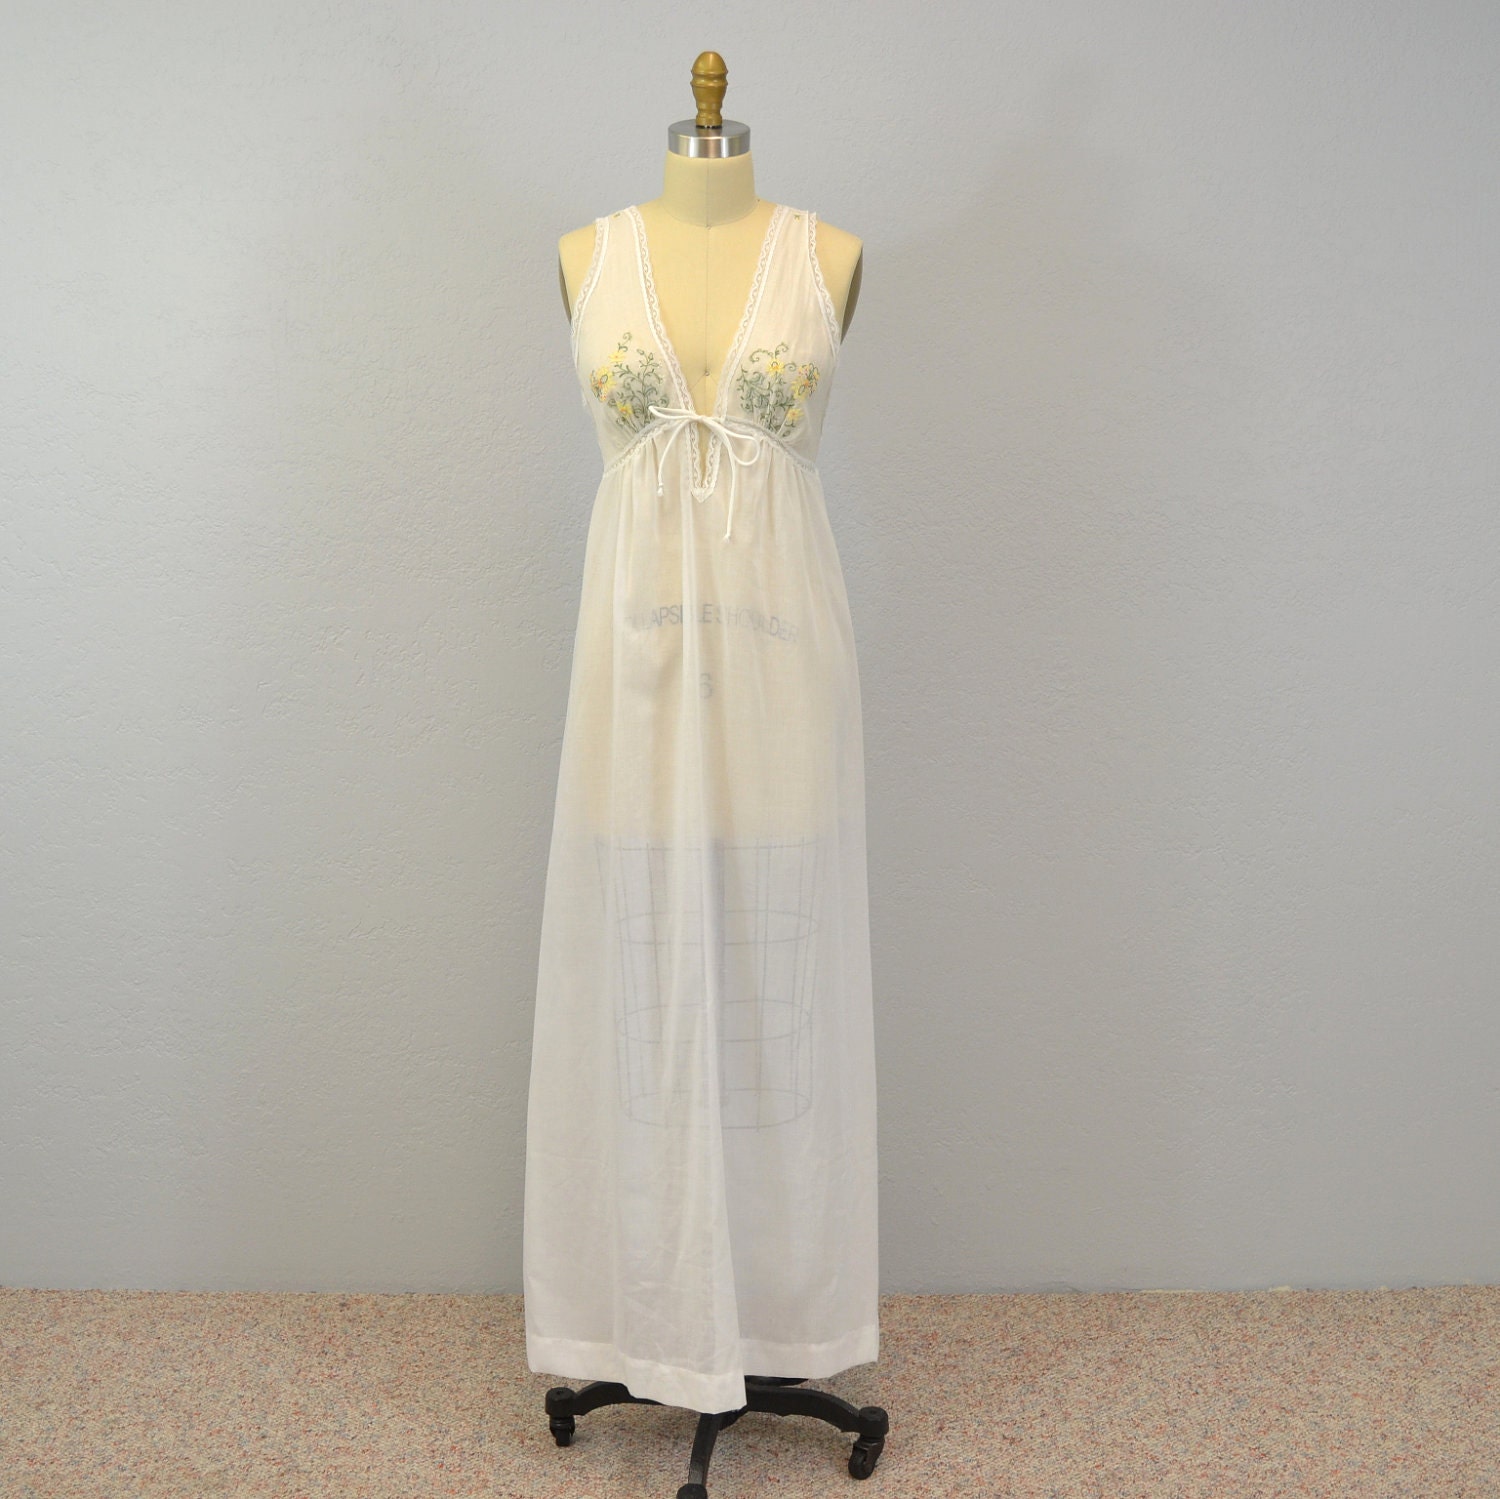 Vintage night gown / floral embroidery / sheer gauze